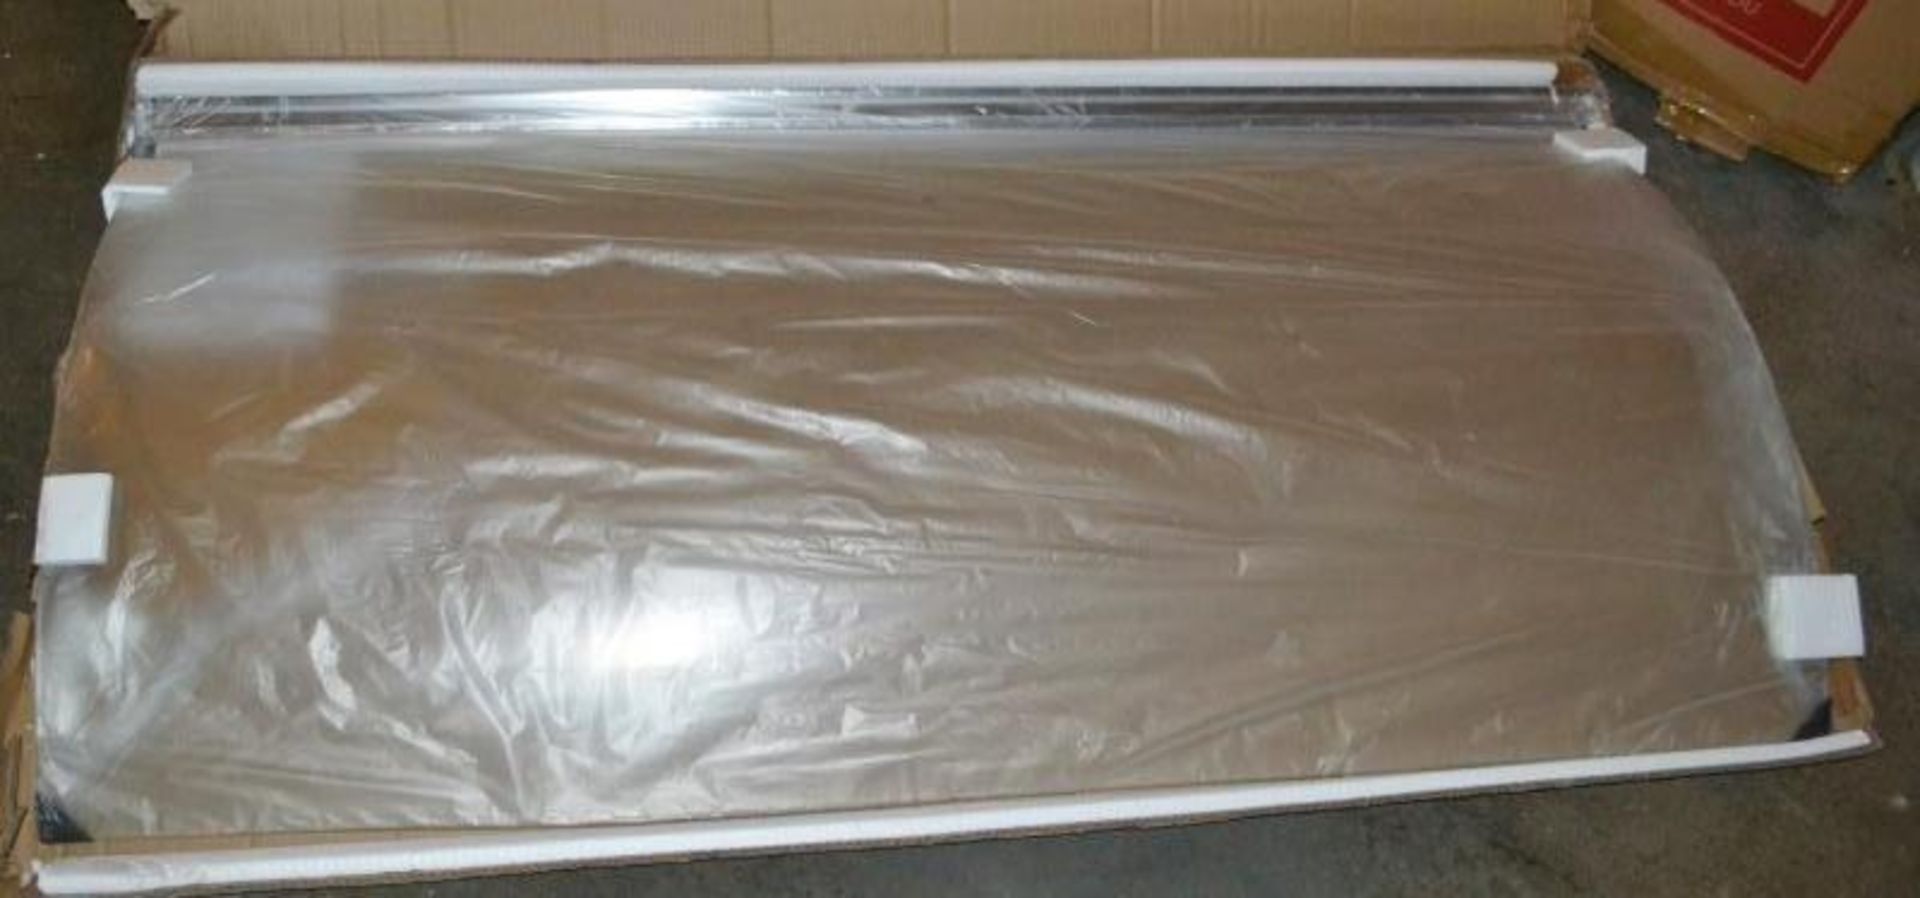 1 x Curved Bath Screen With Rail - BSP1001 - New / Unused Stock - Dimensions: 745 x 1480 x 6mm - CL2